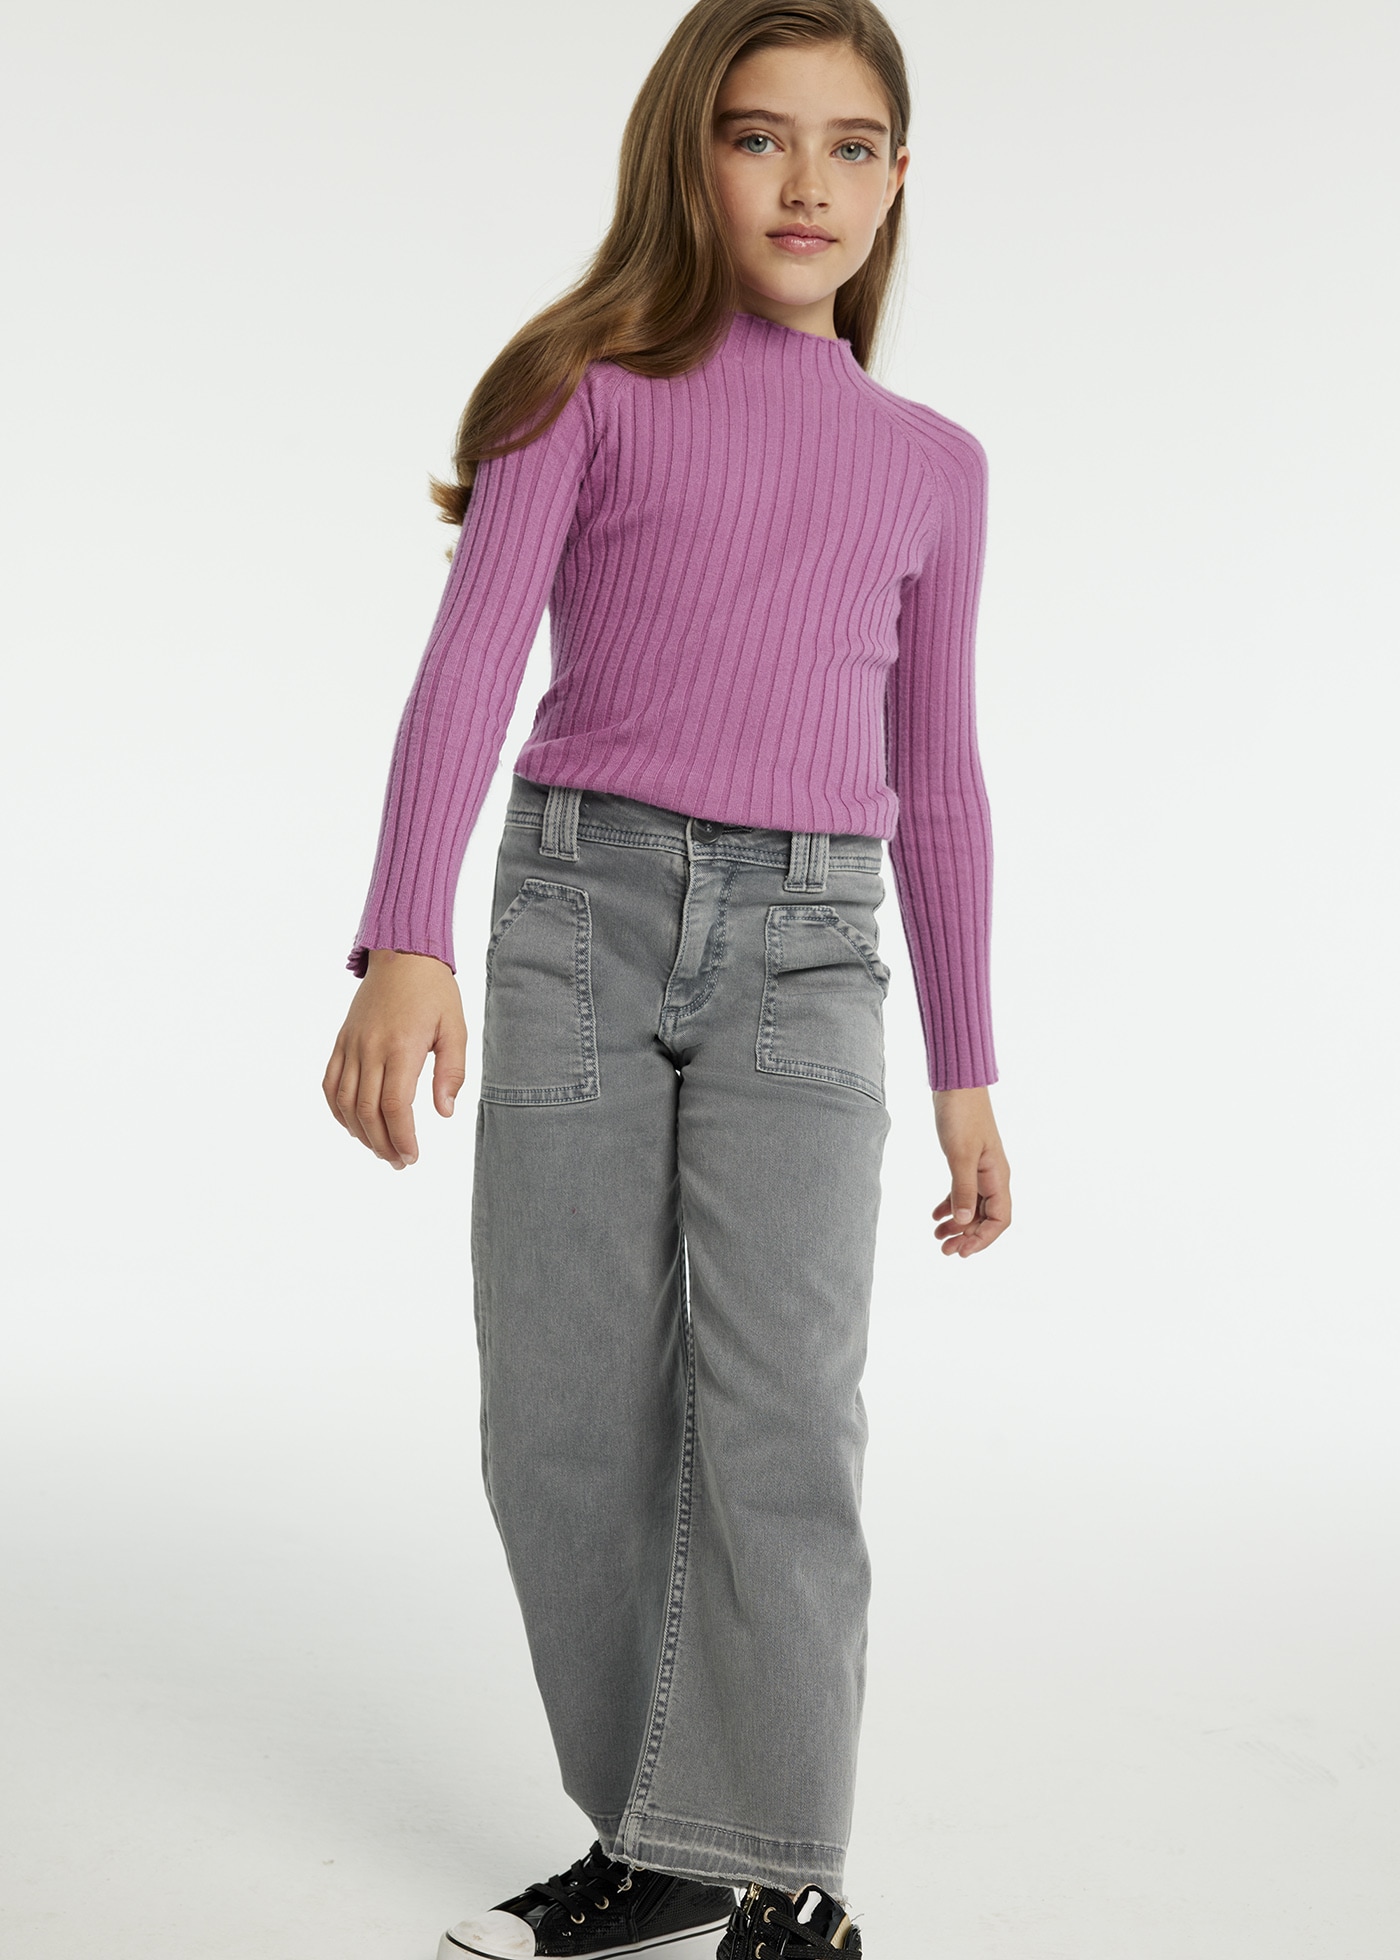 Flared twill pants for girls